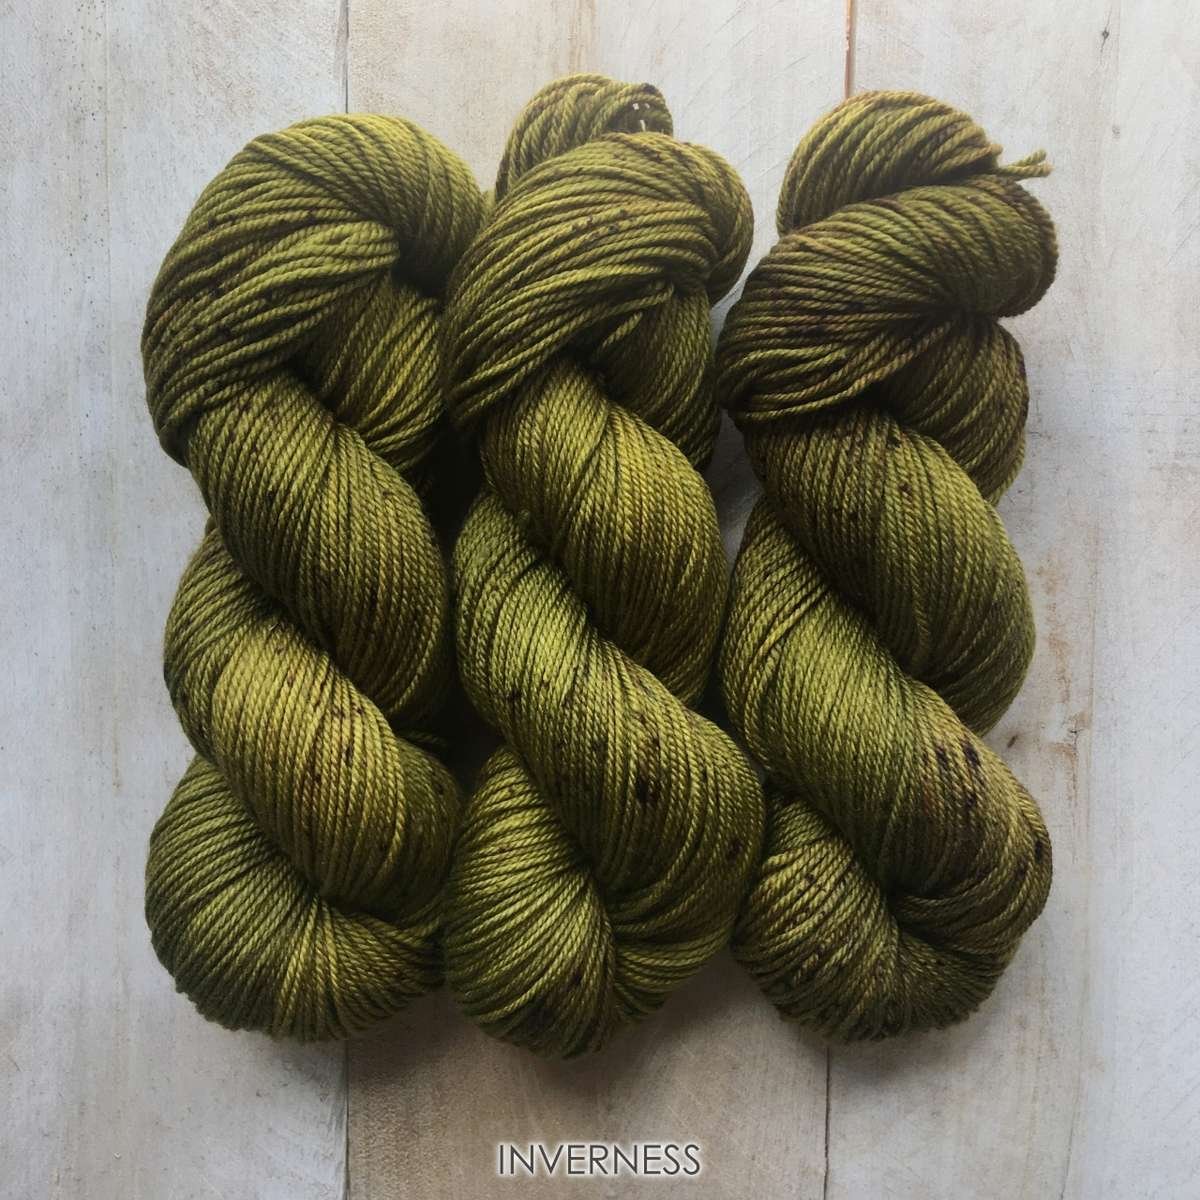 Hand-dyed yarn Louise Robert Inverness